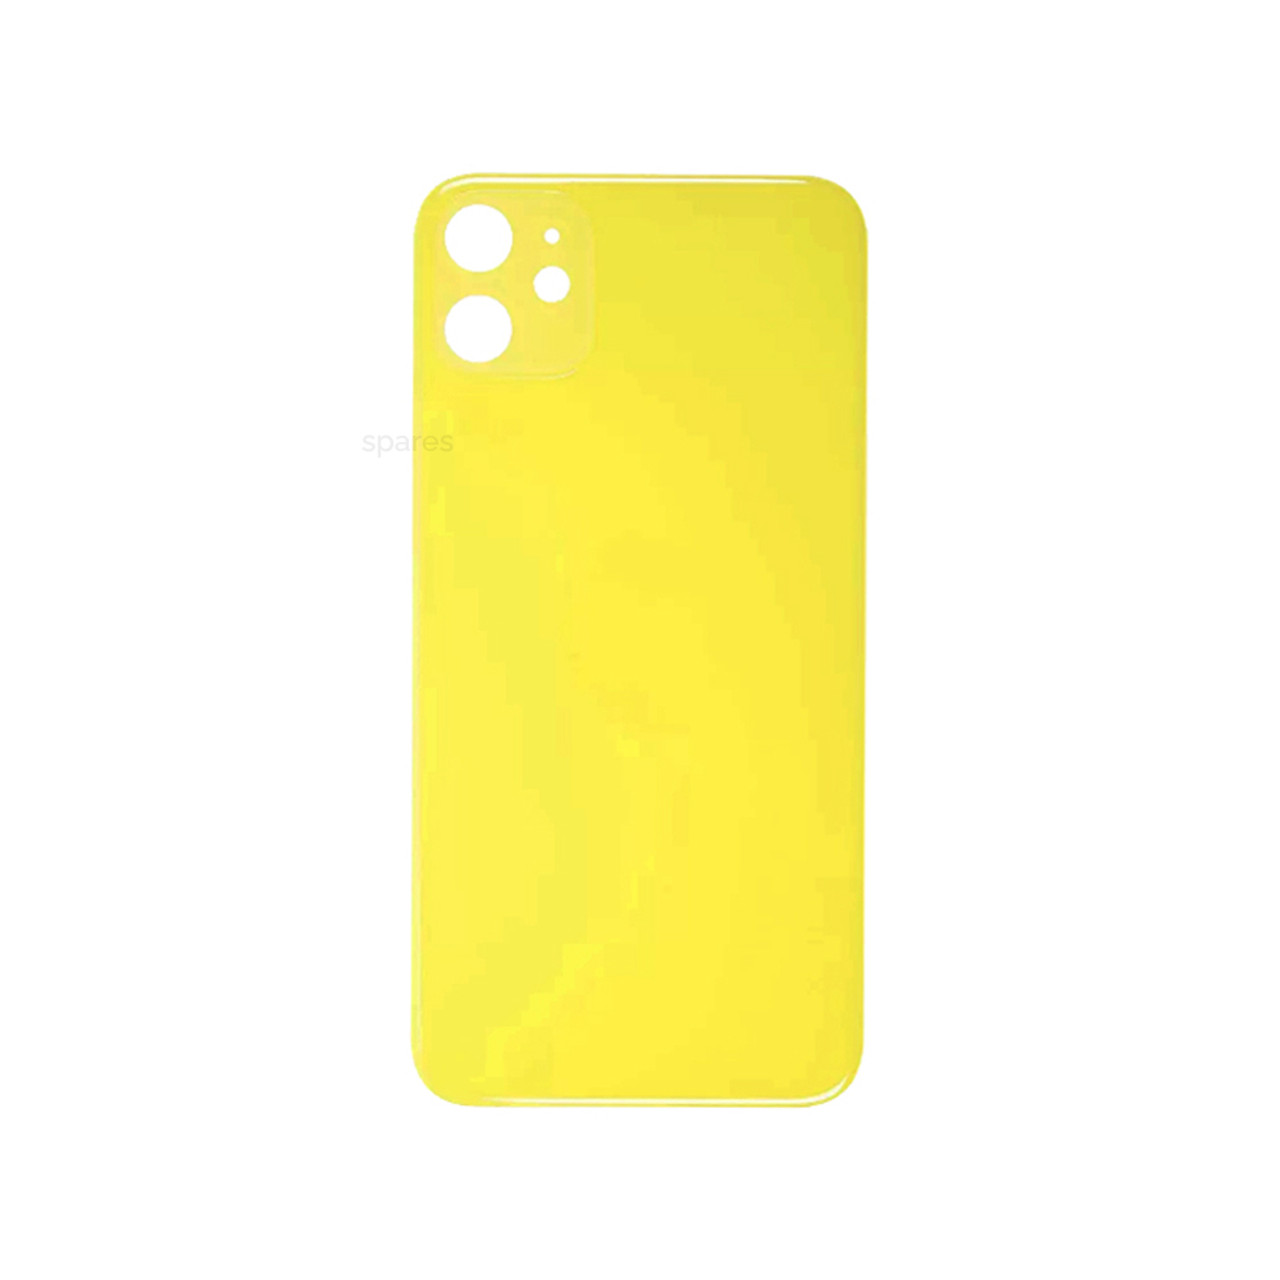 iPhone 11 Rear Back Glass With Big Camera Hole Yellow Replacement